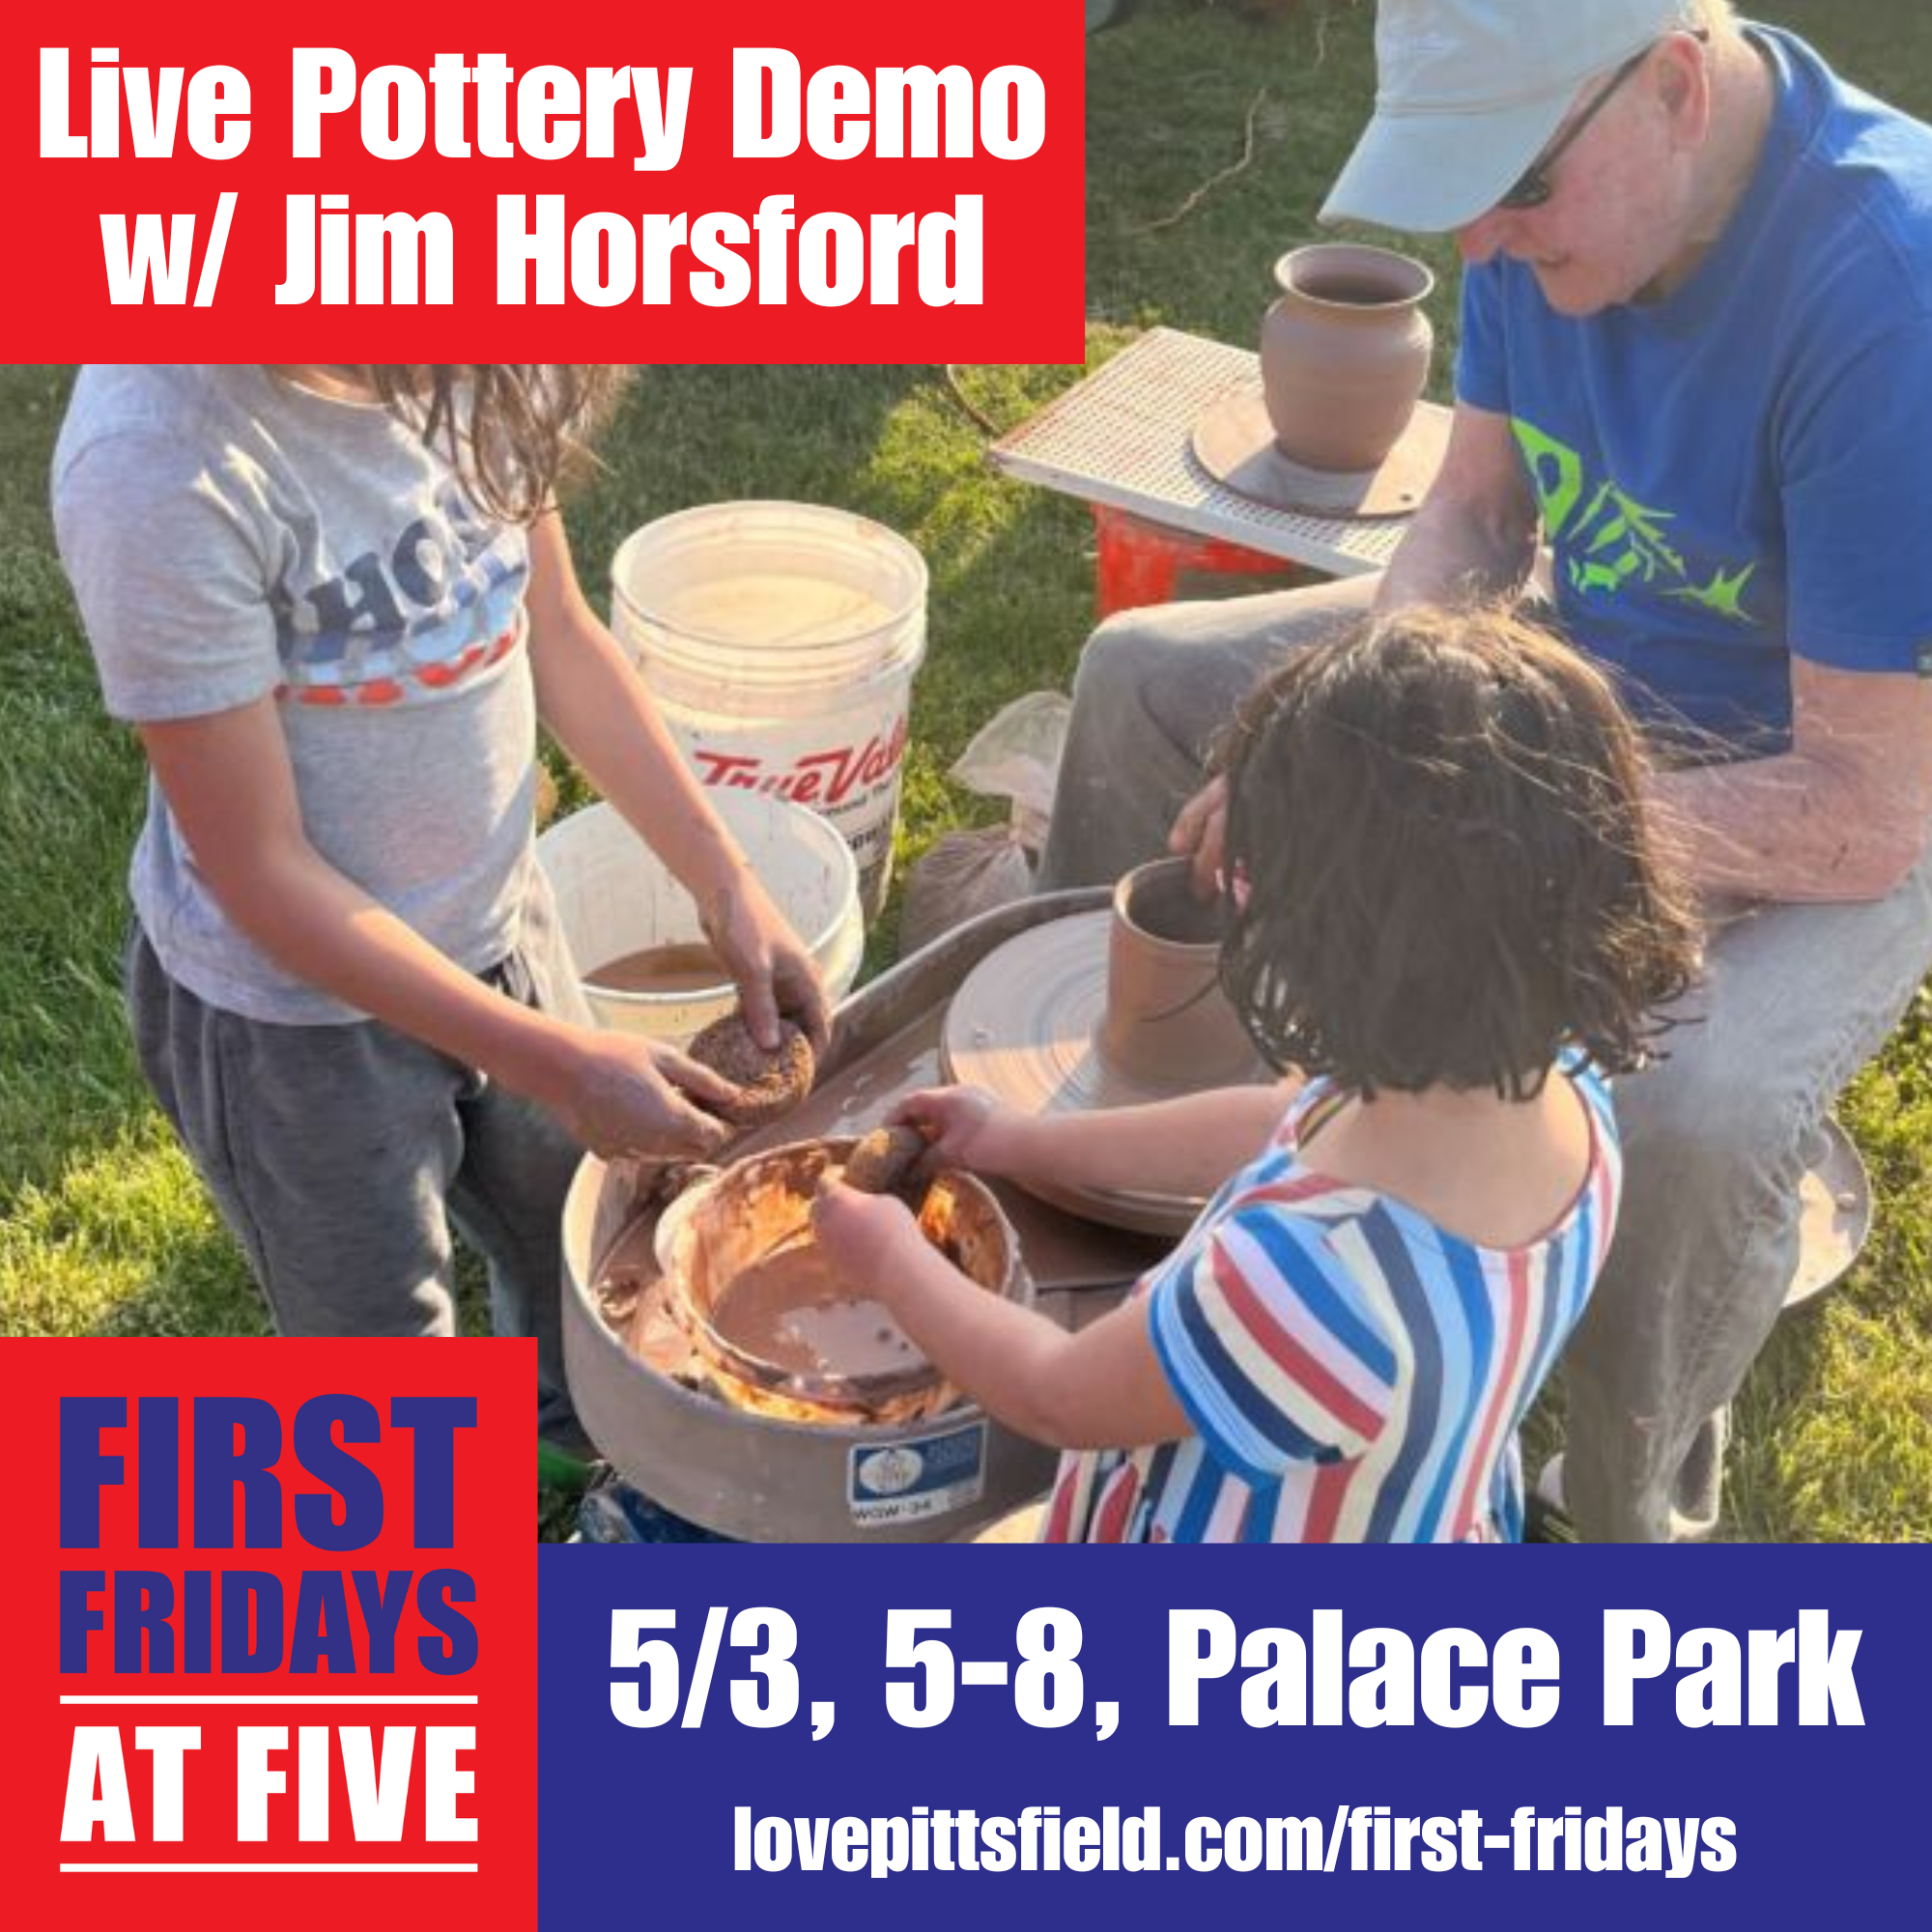 Live pottery demonstration with Jim Horsford 